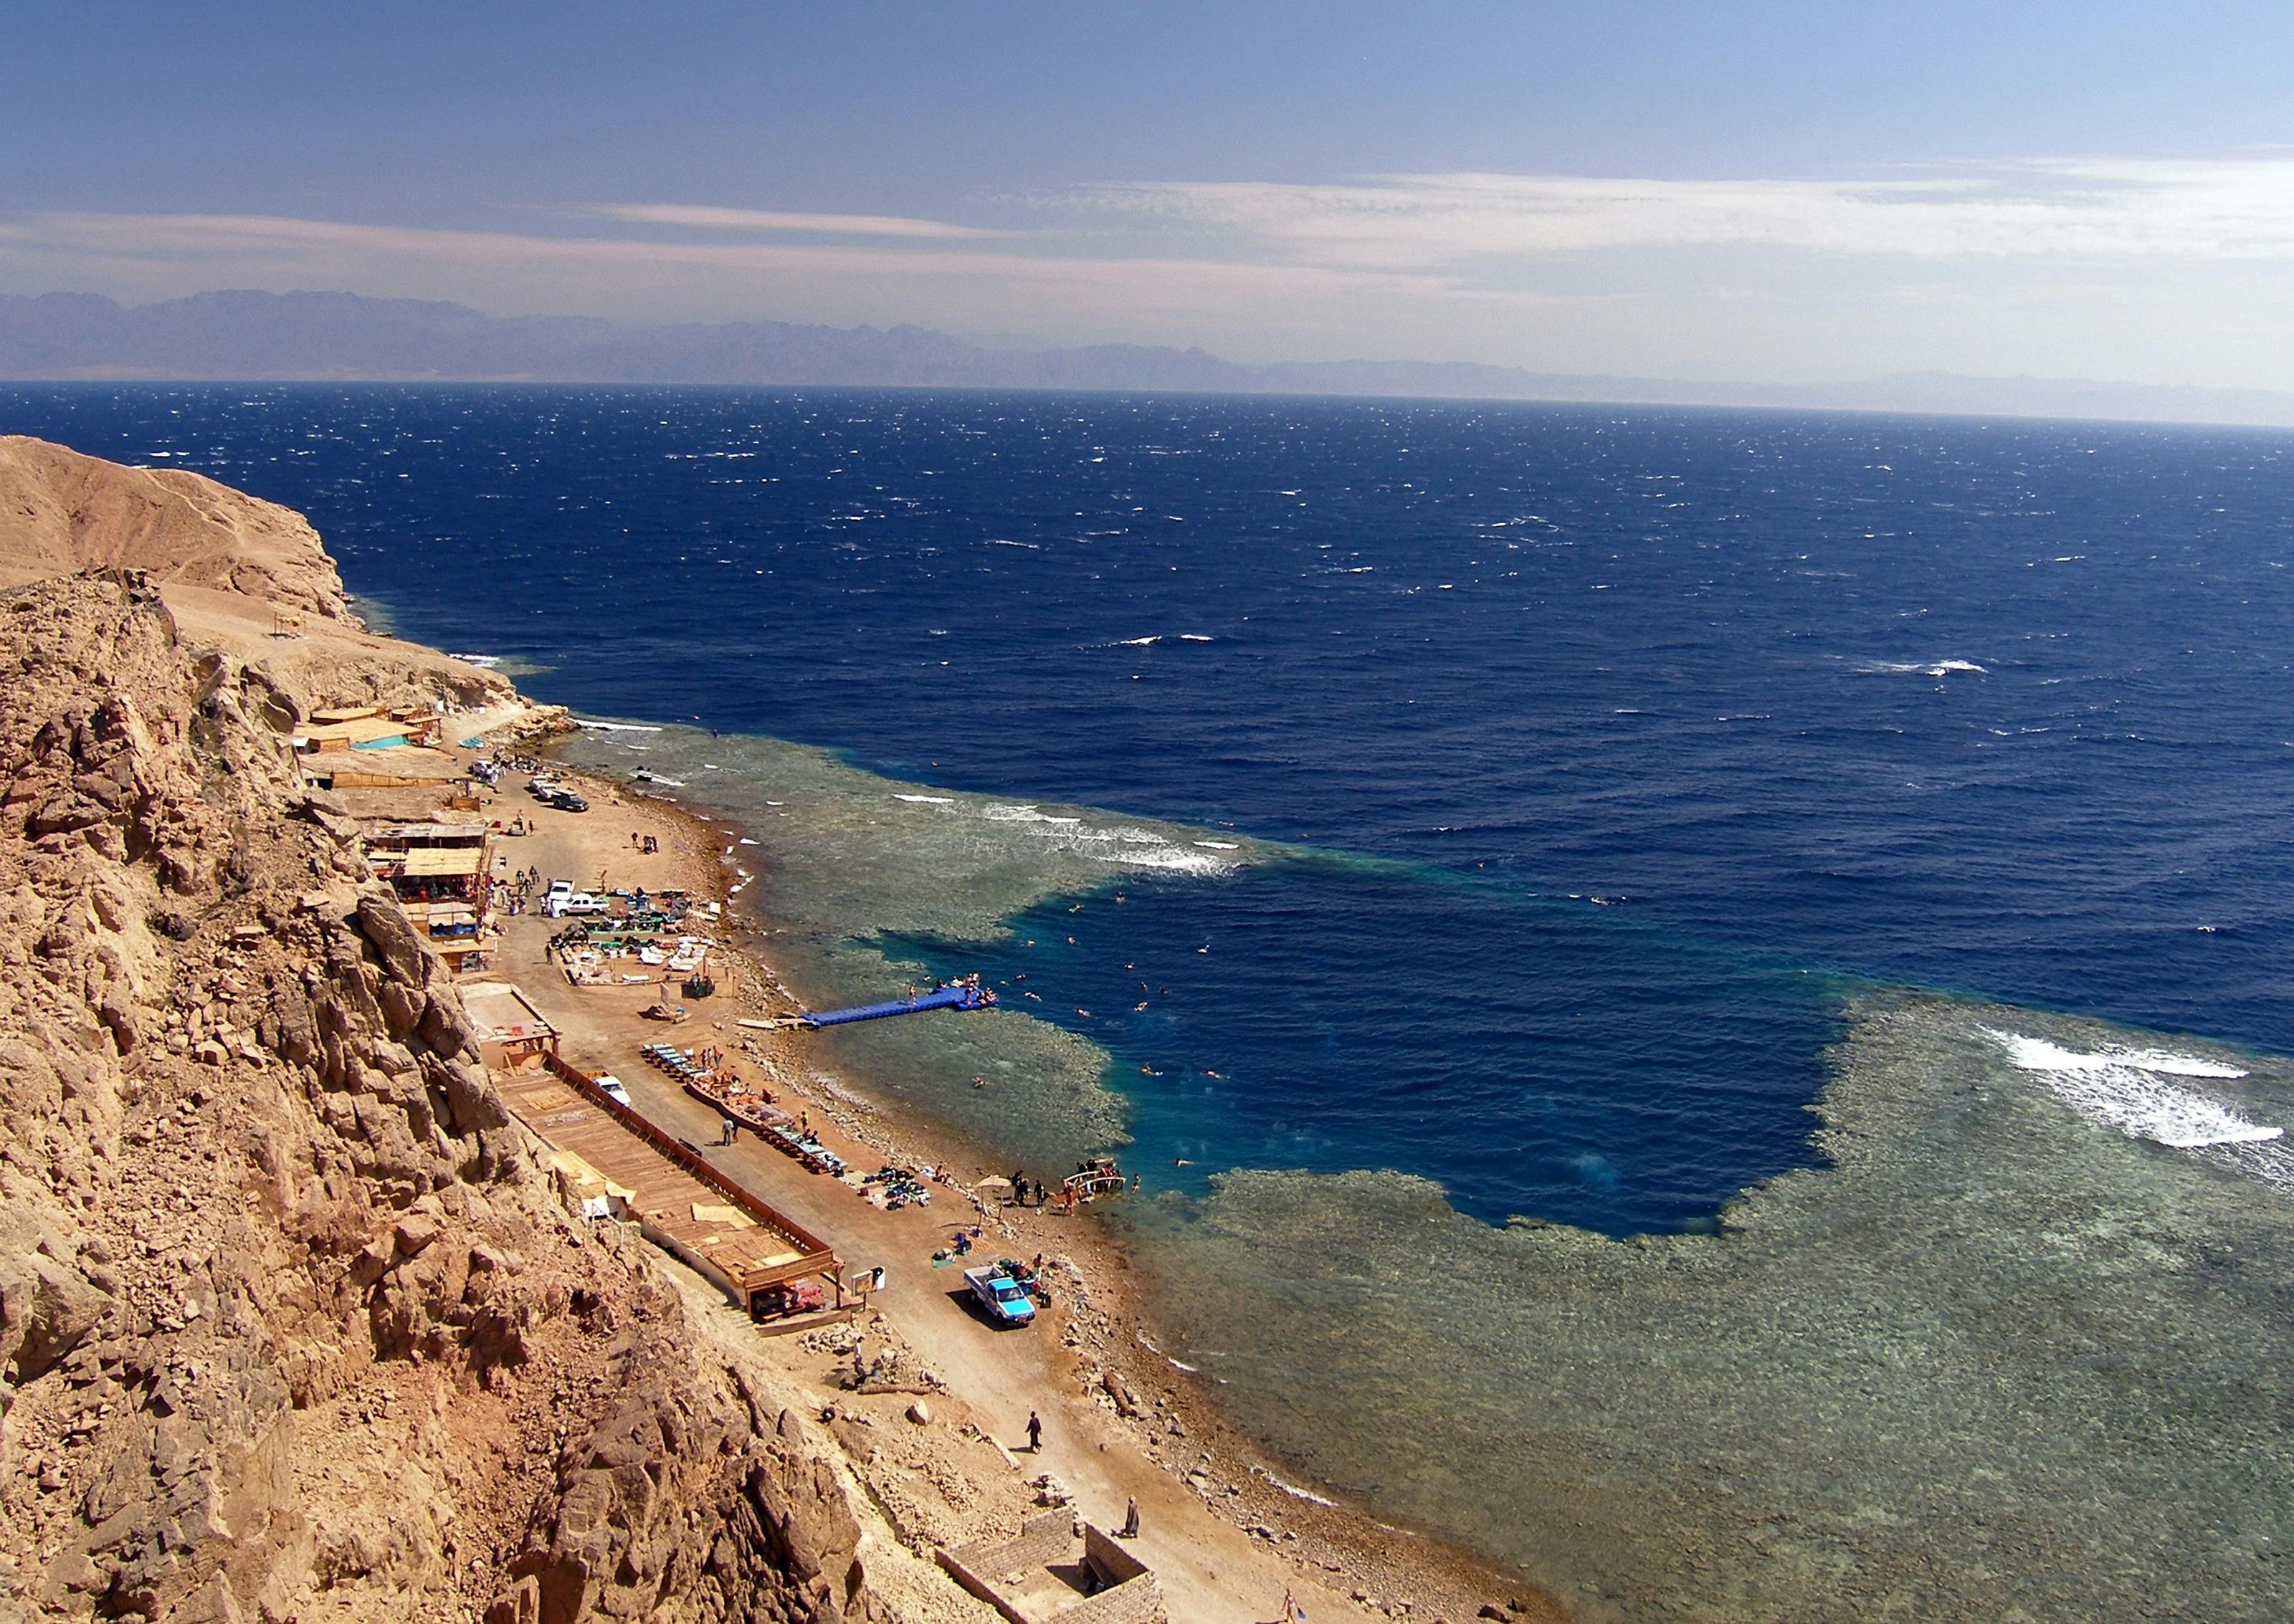 Blue Hole Snorkeling 4x4 safari and Dahab tour from Sharm El Sheikh with